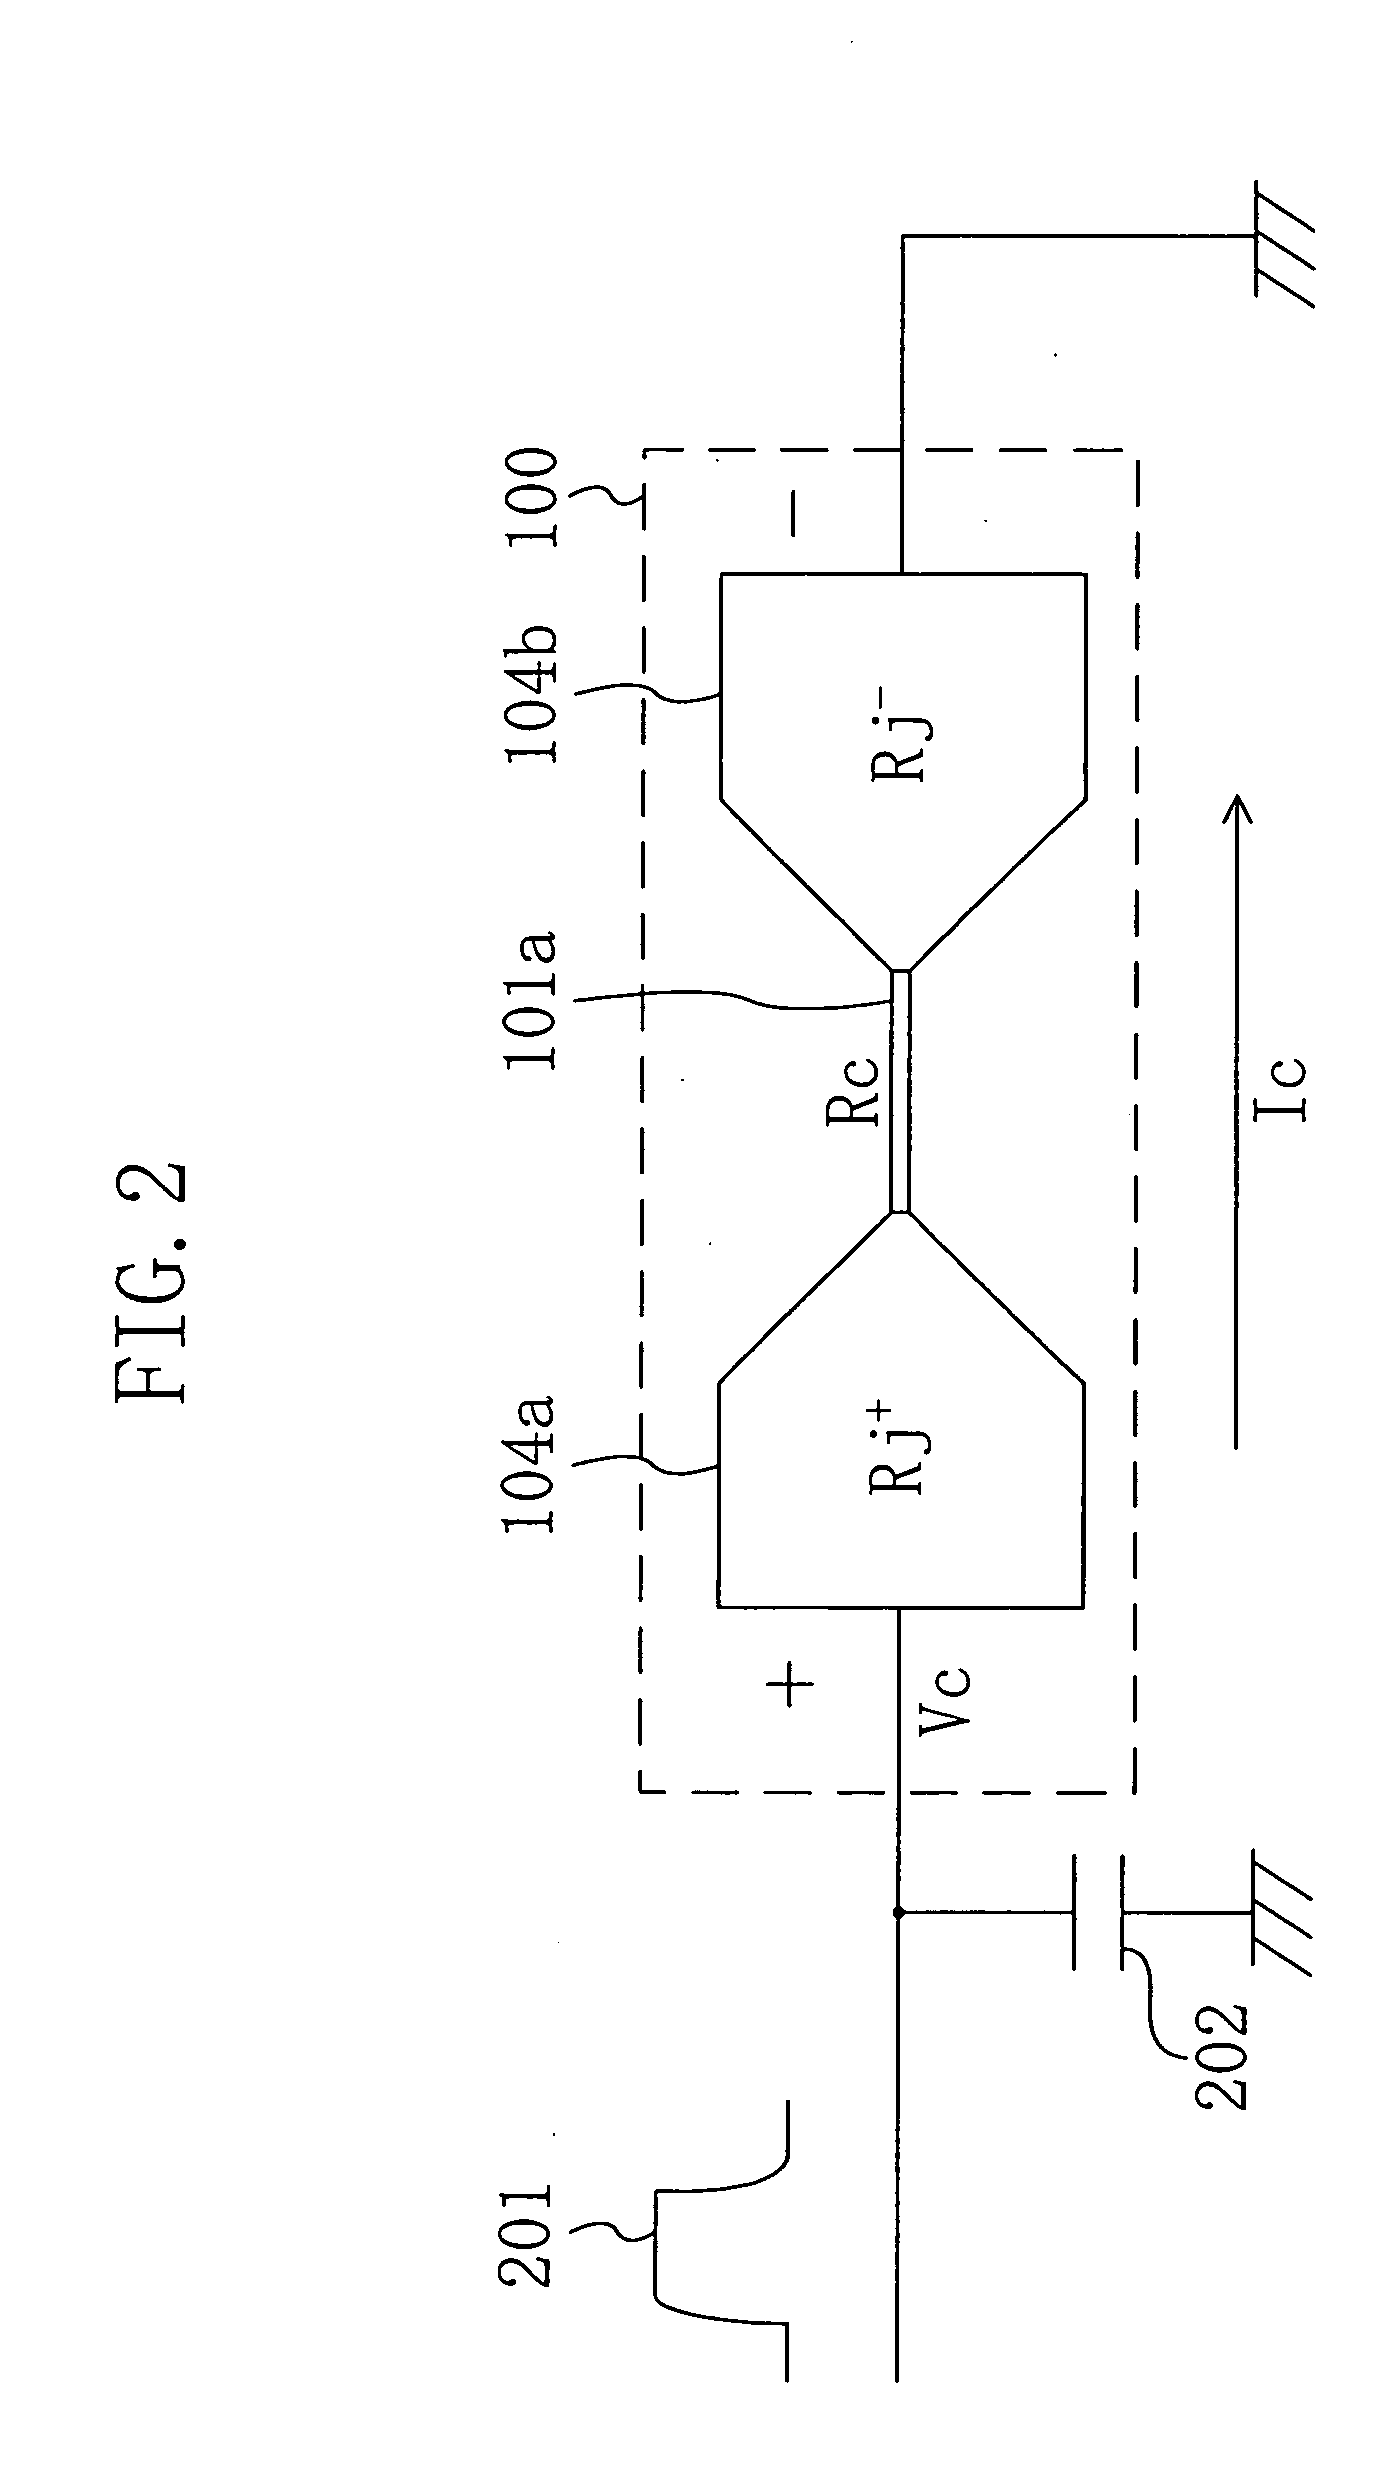 Fuse and write method for fuse